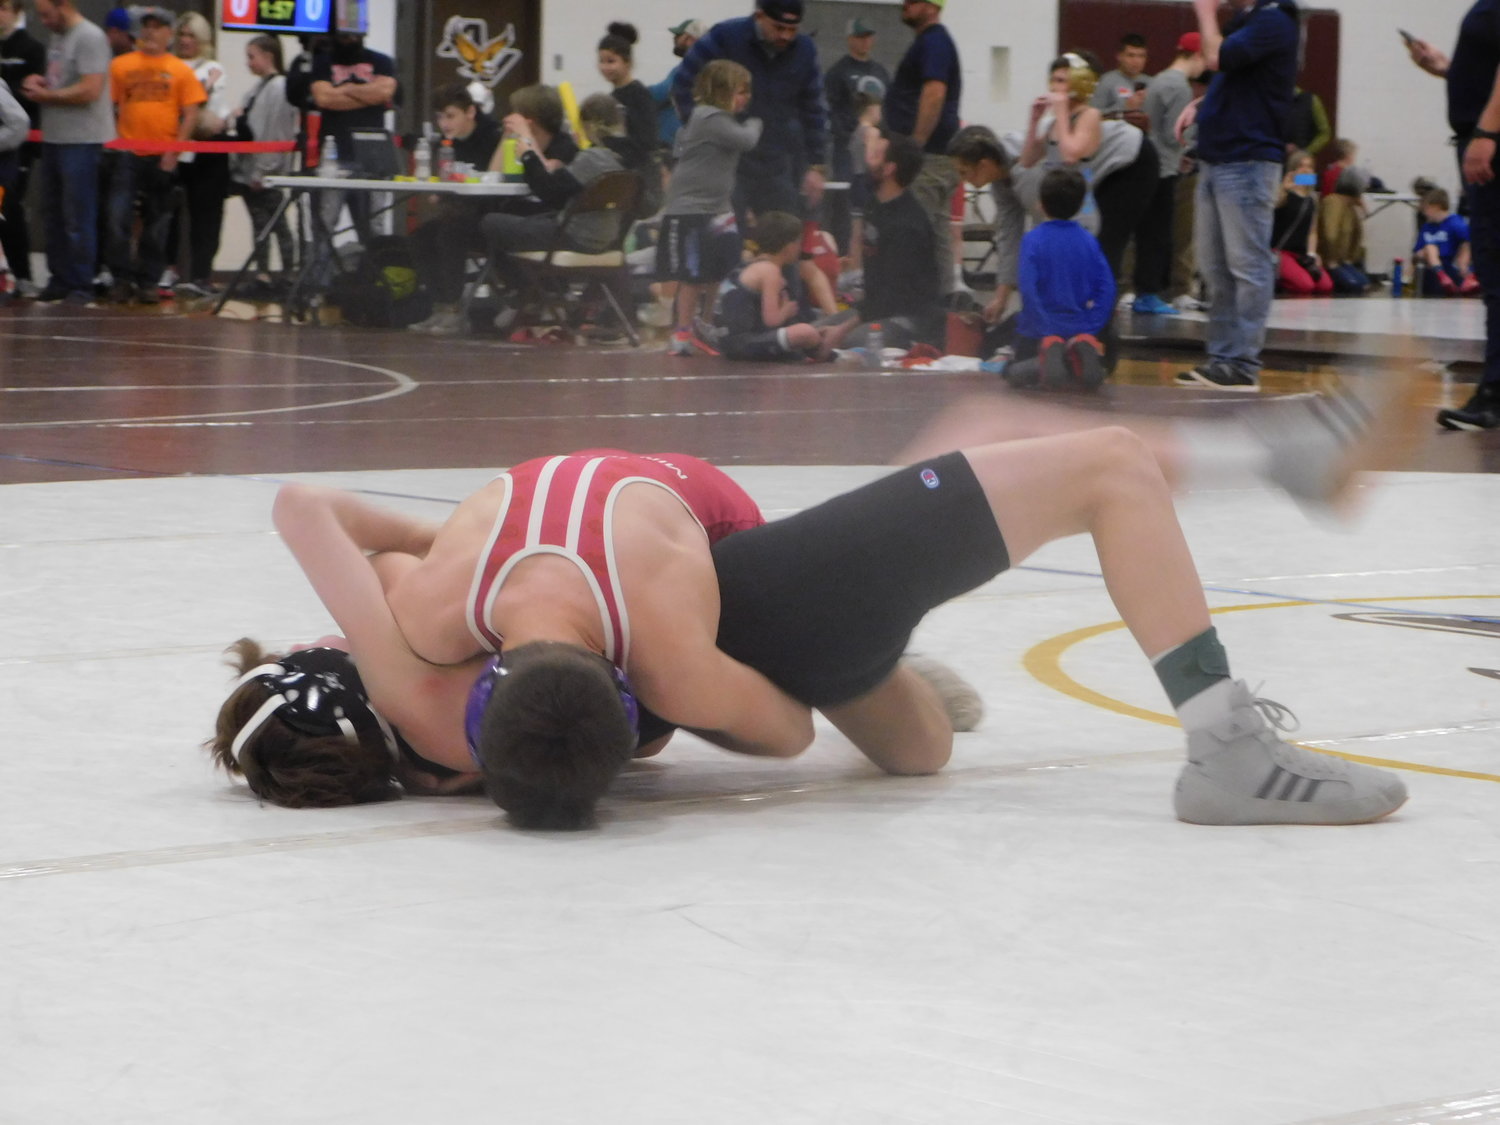 Hayden Holm of Goodhue pinning his opponent at the Apple Valley Open.  Hayden placed 2nd.